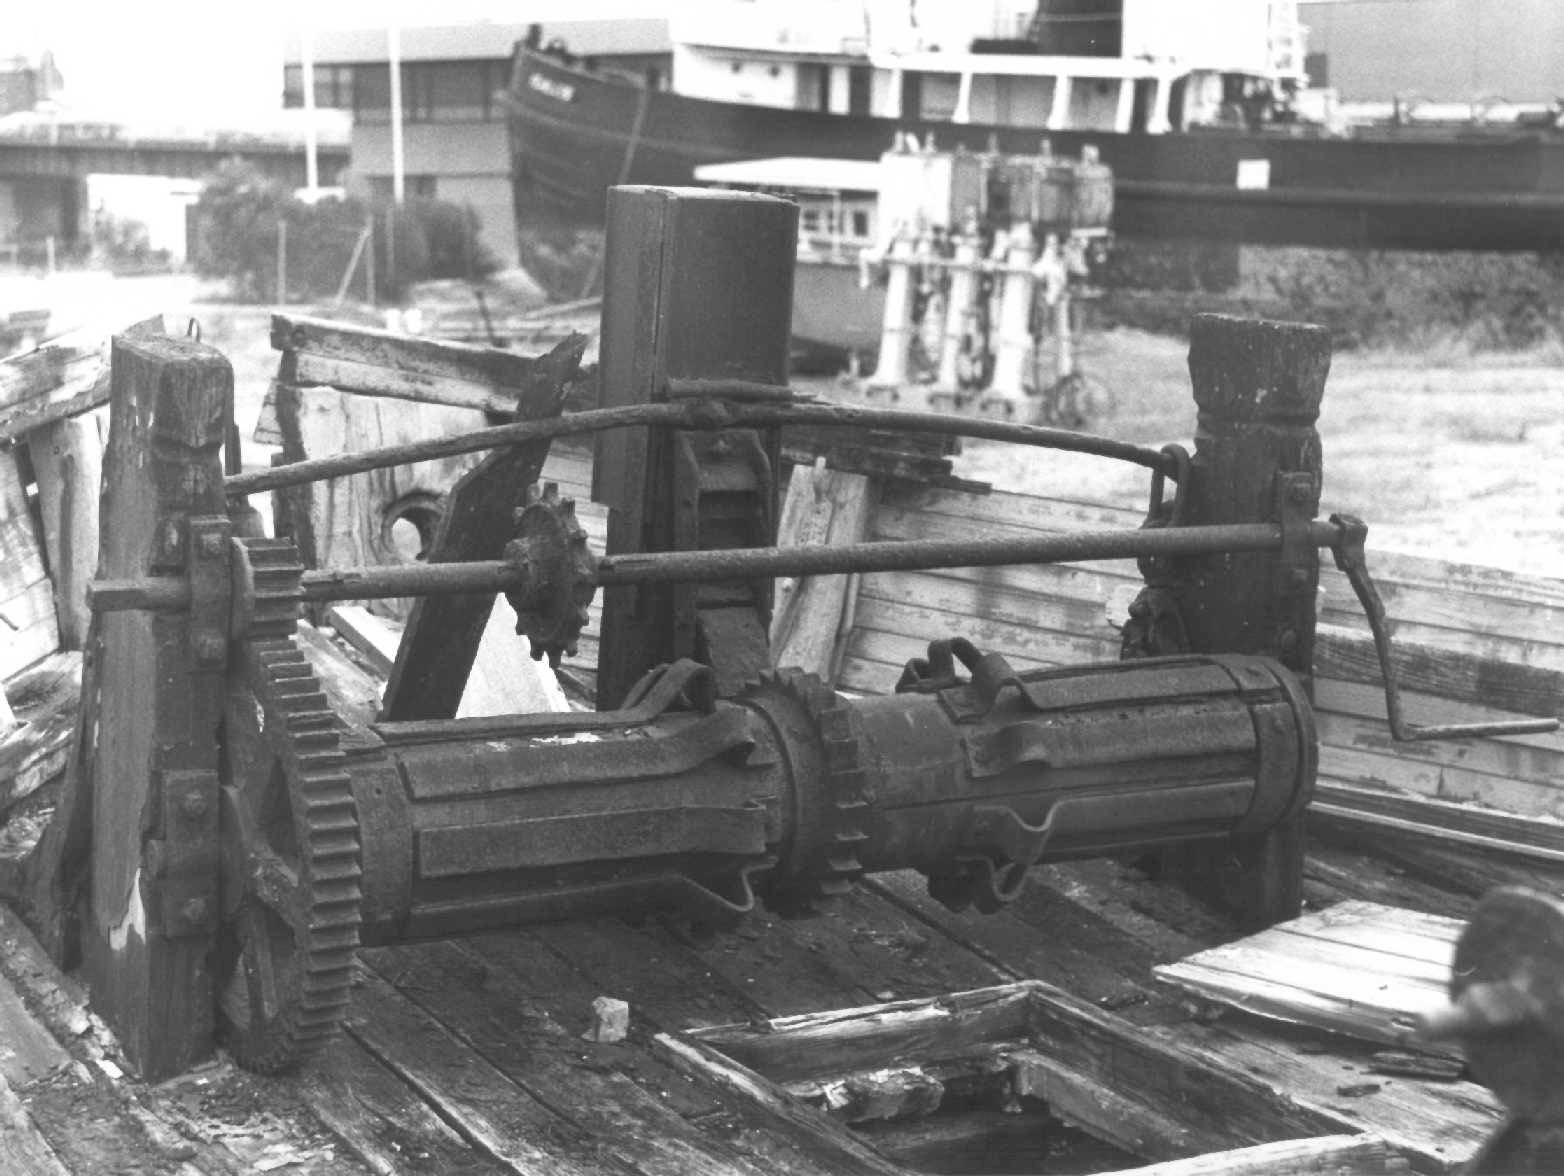 This image shows forecastle and winch